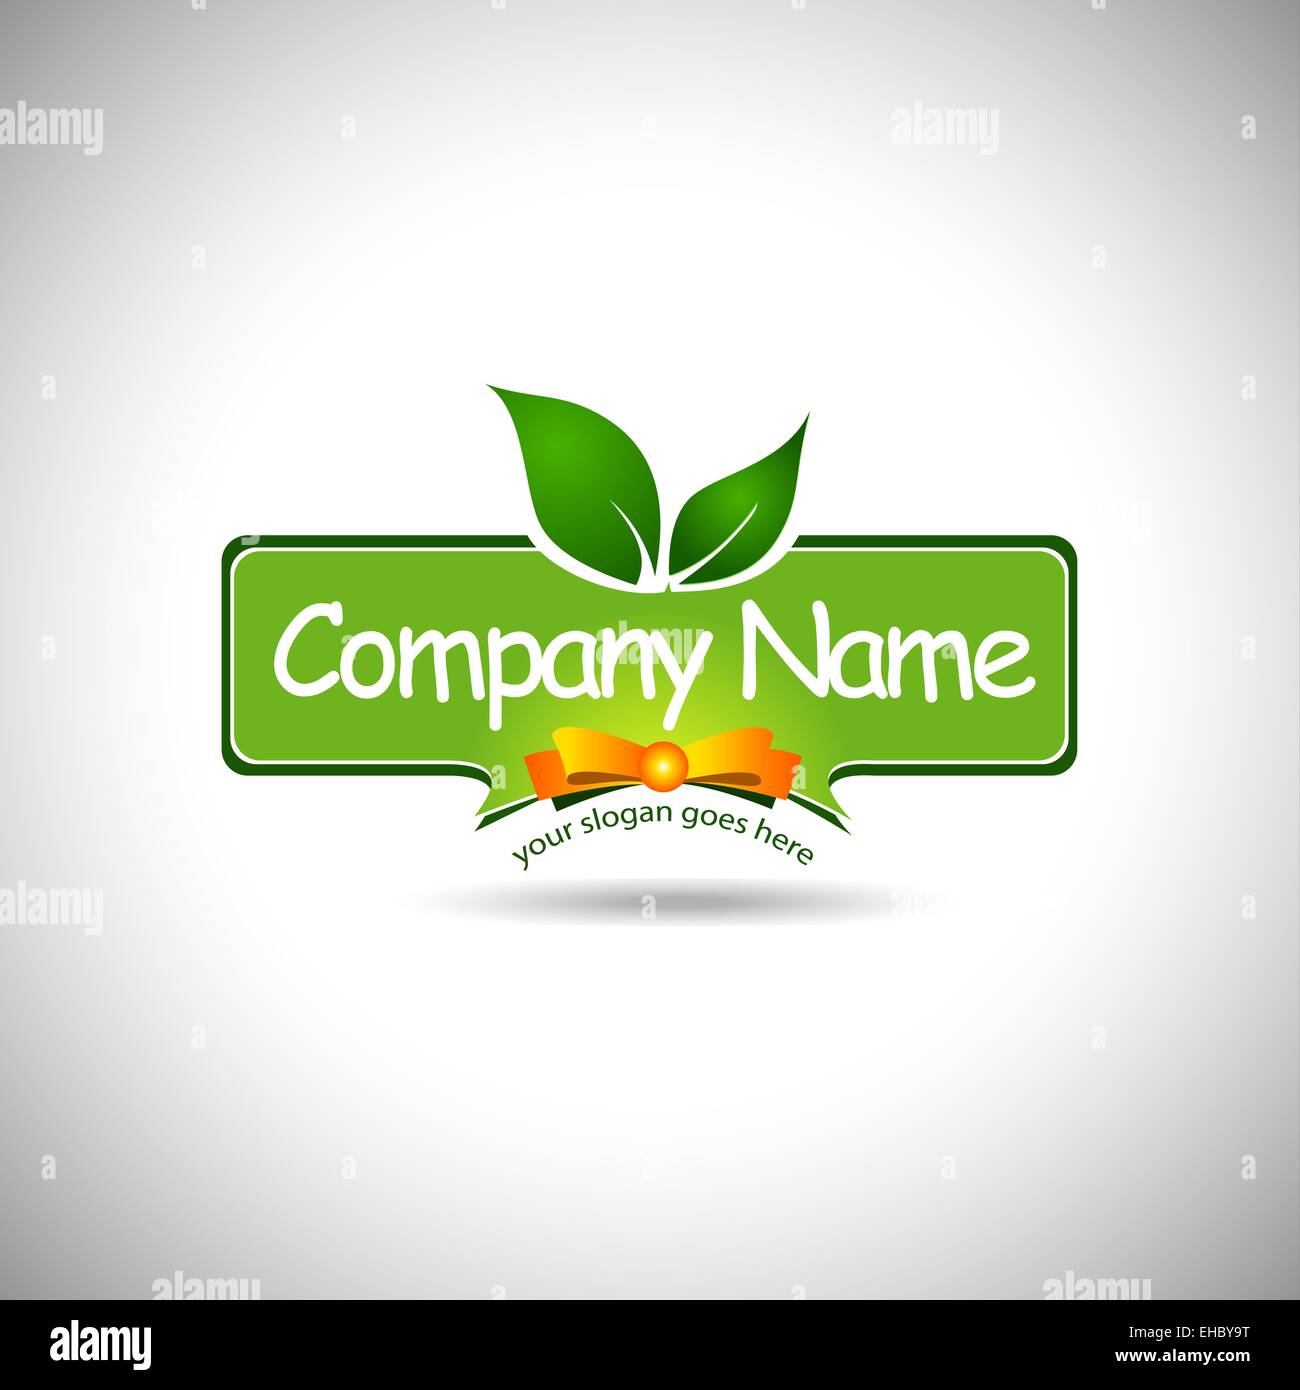 Food Label Logo Design. Creative food company logo design with leafs and bow. Stock Photo